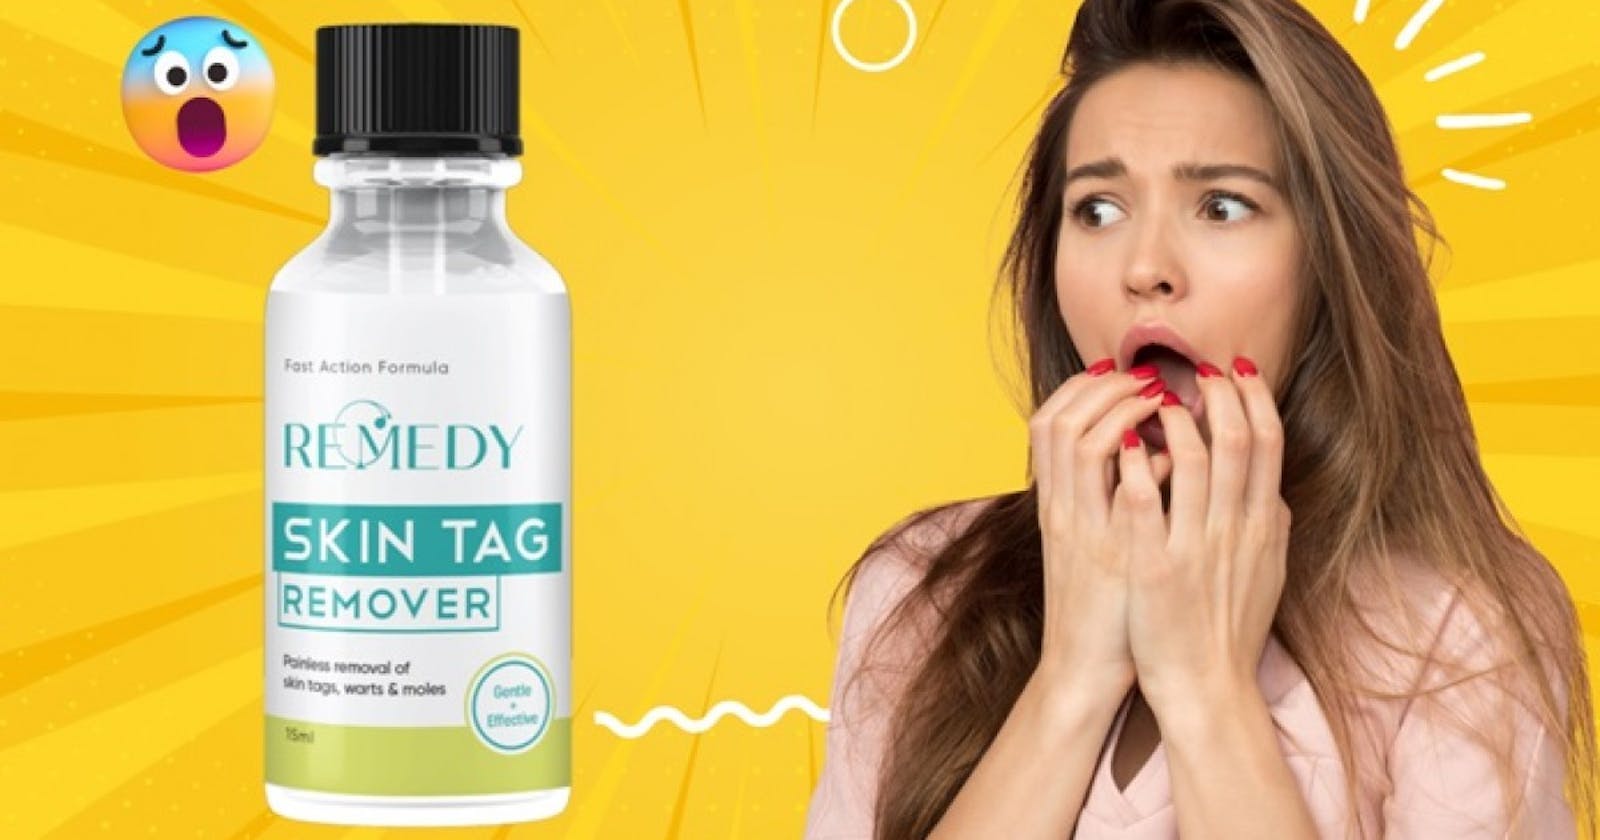 Remday Skin Tag Remover: Scam or Legit Customer Results?